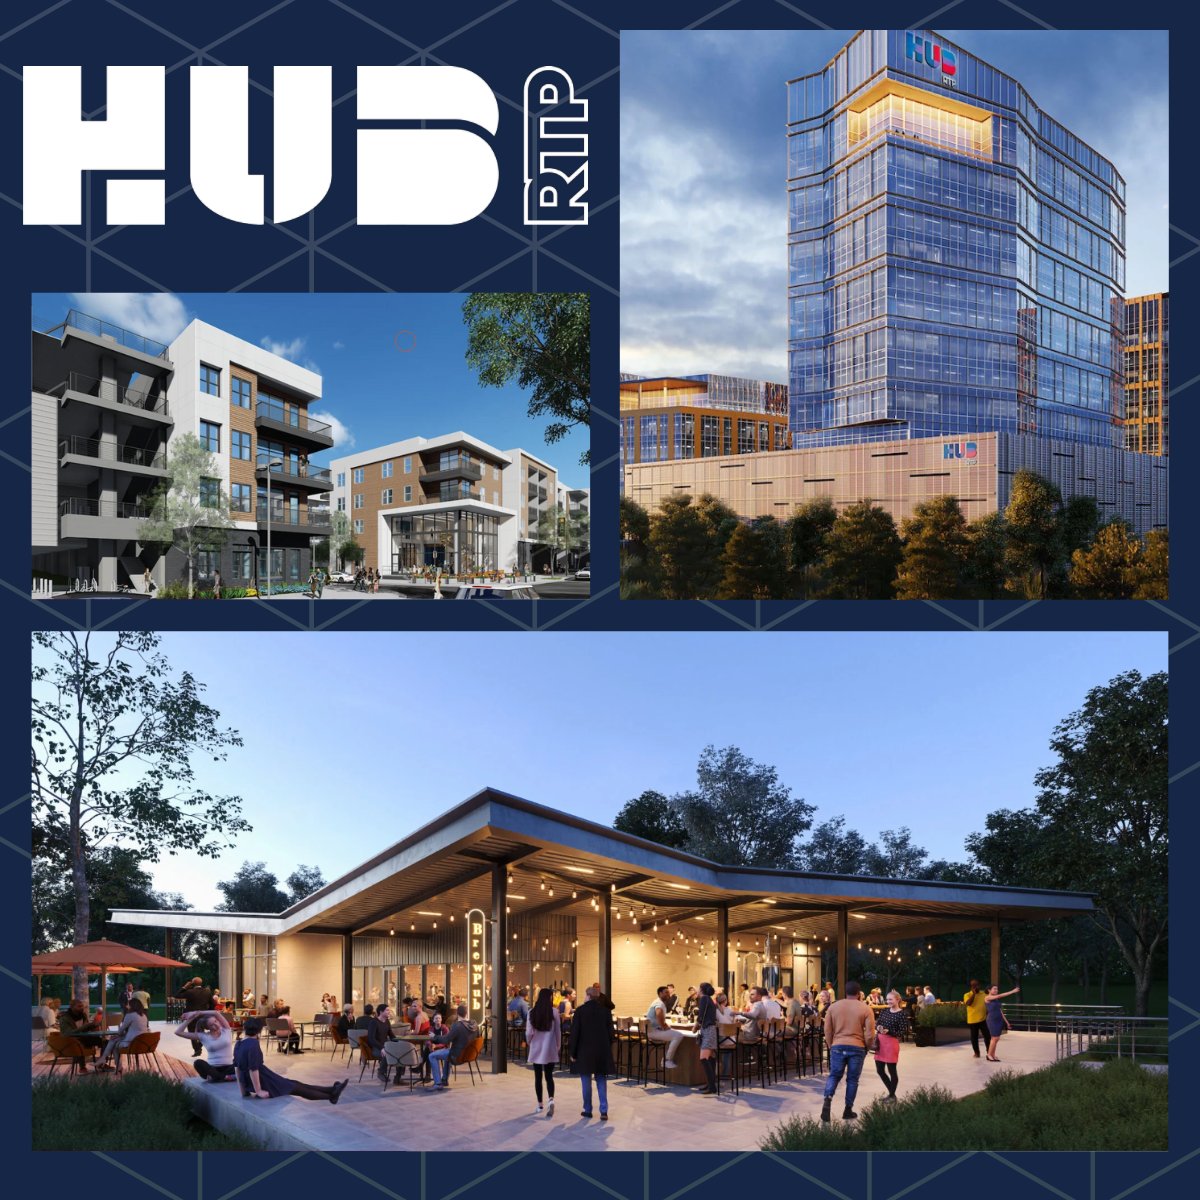 Hub RTP offers the ability to not only work in Research Triangle Park but live there, too. Once complete, Hub RTP will boast 1-million square feet of office and lab space, 50,000-square feet of retail, 1,200 apartments, 250 hotel rooms, and more. researchtriangle.org/counties/durha…